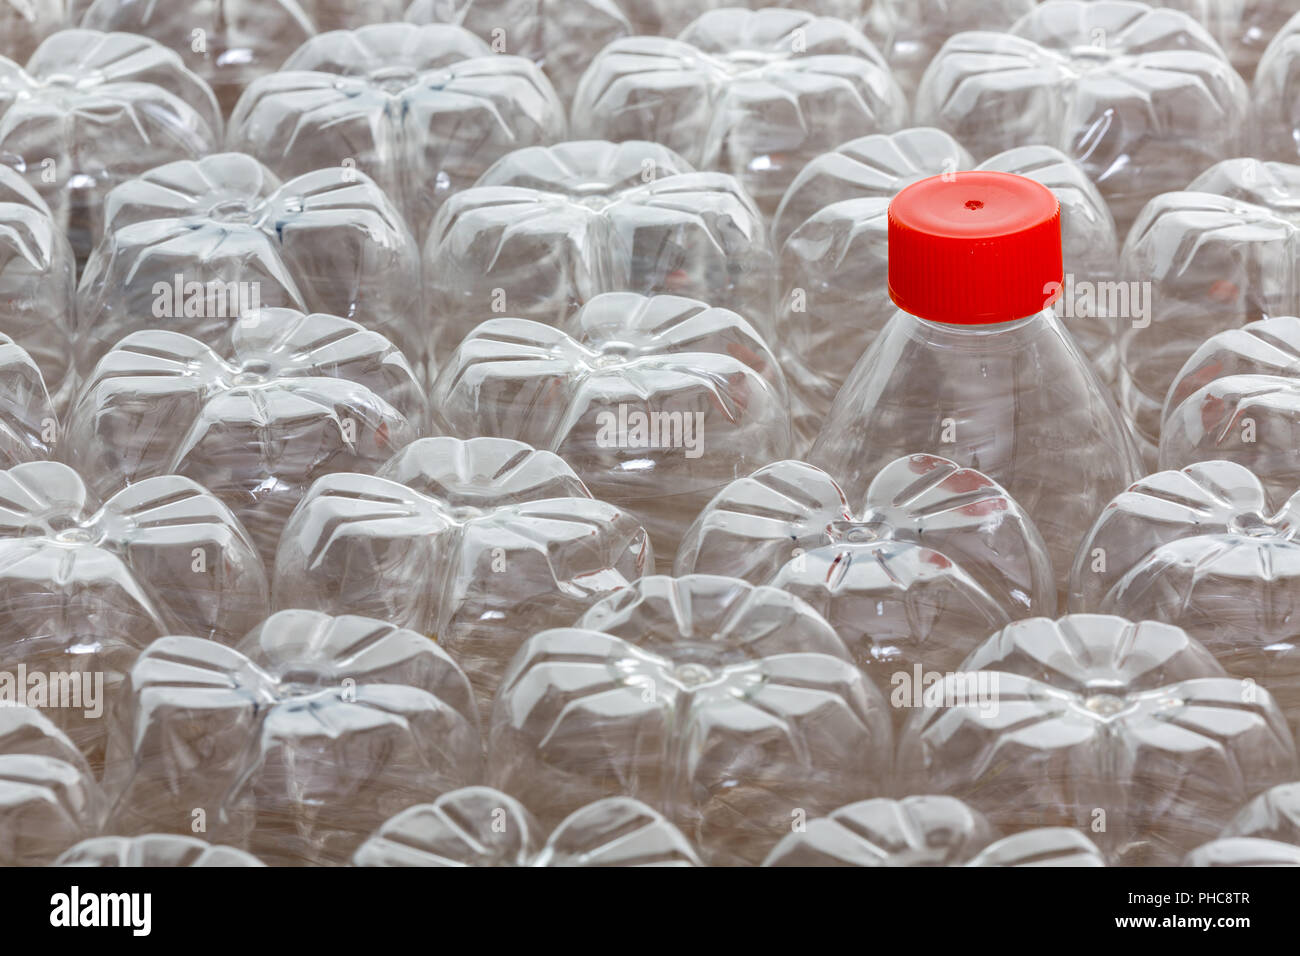 Single unique plastic bottle with red cap amongst many upturned clean empty bottles in a concept of recycling and individuality, full frame close up v Stock Photo